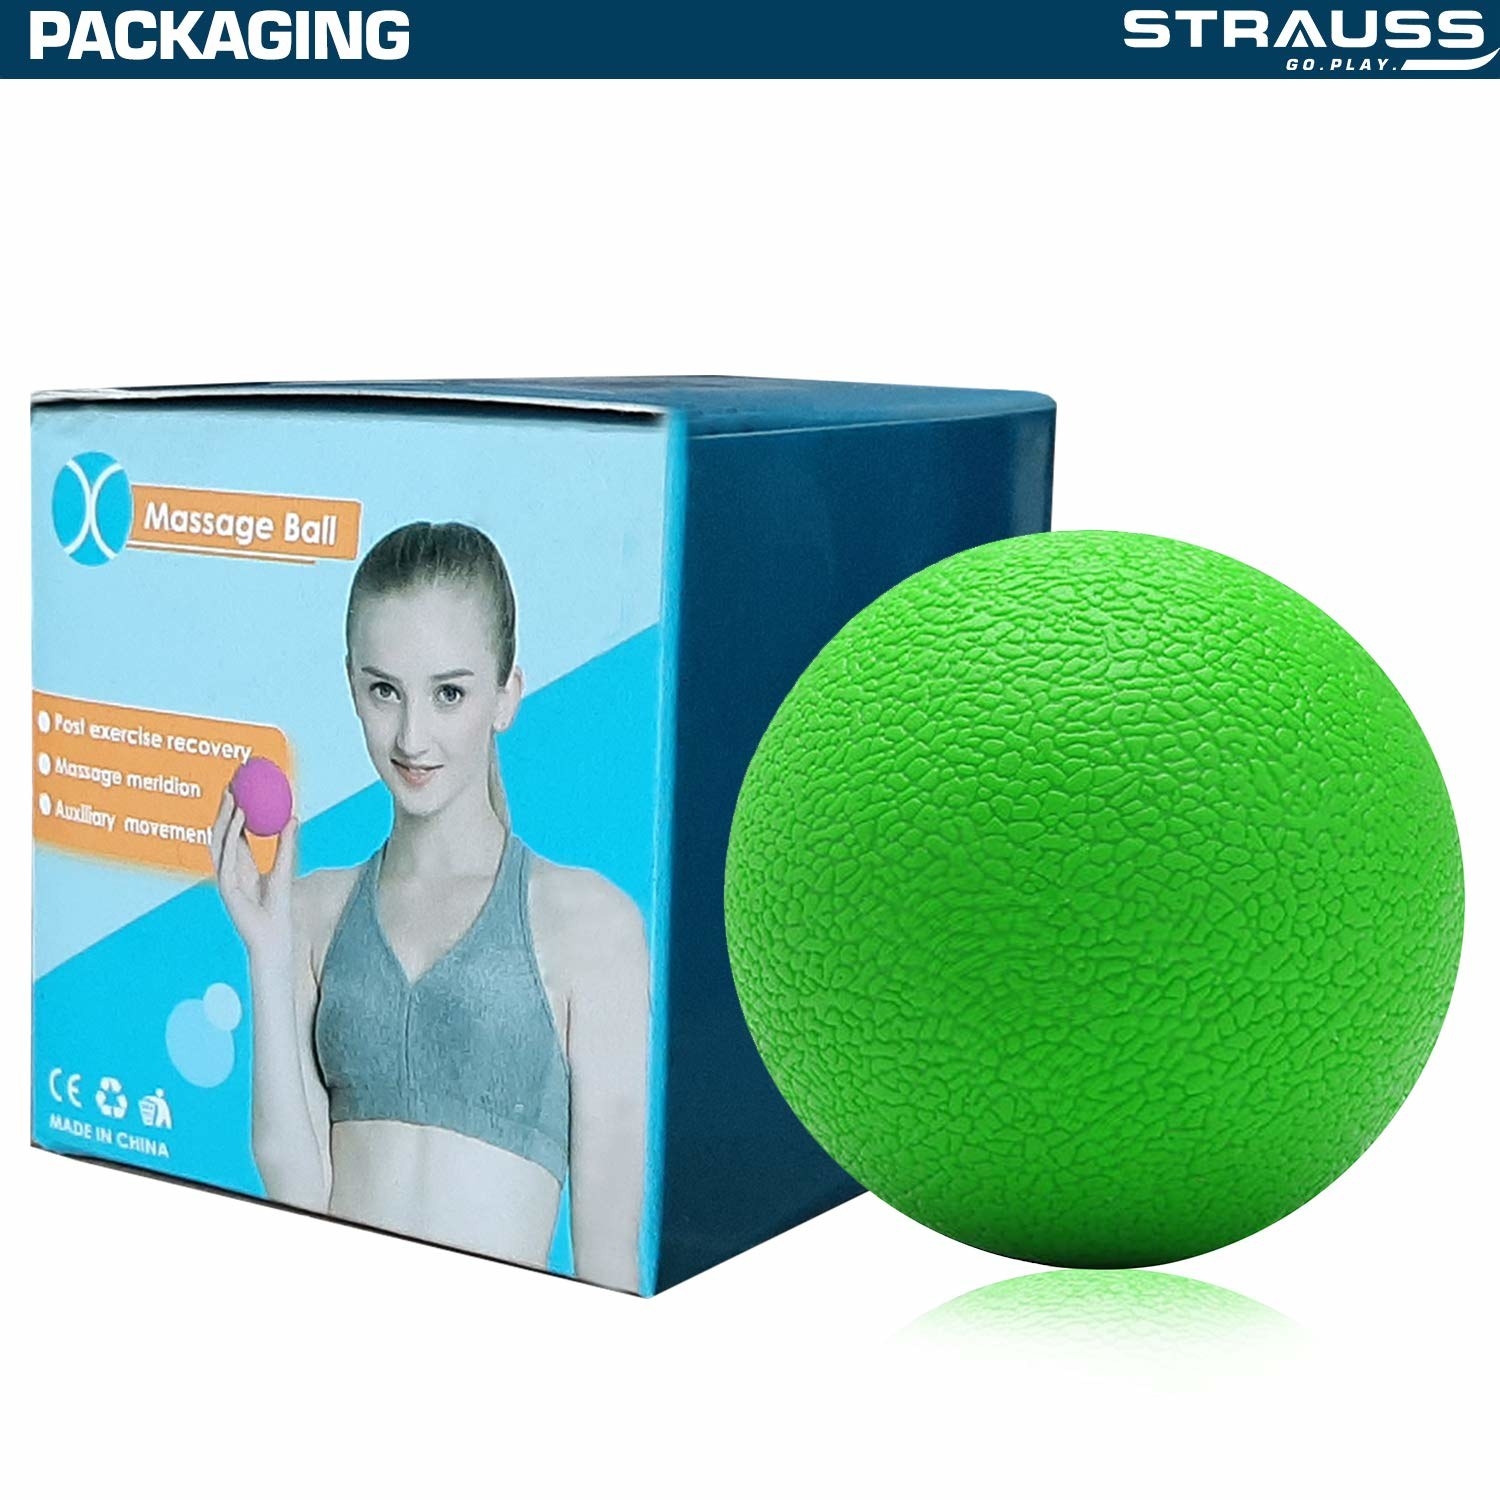 A green massage ball with the packaging 